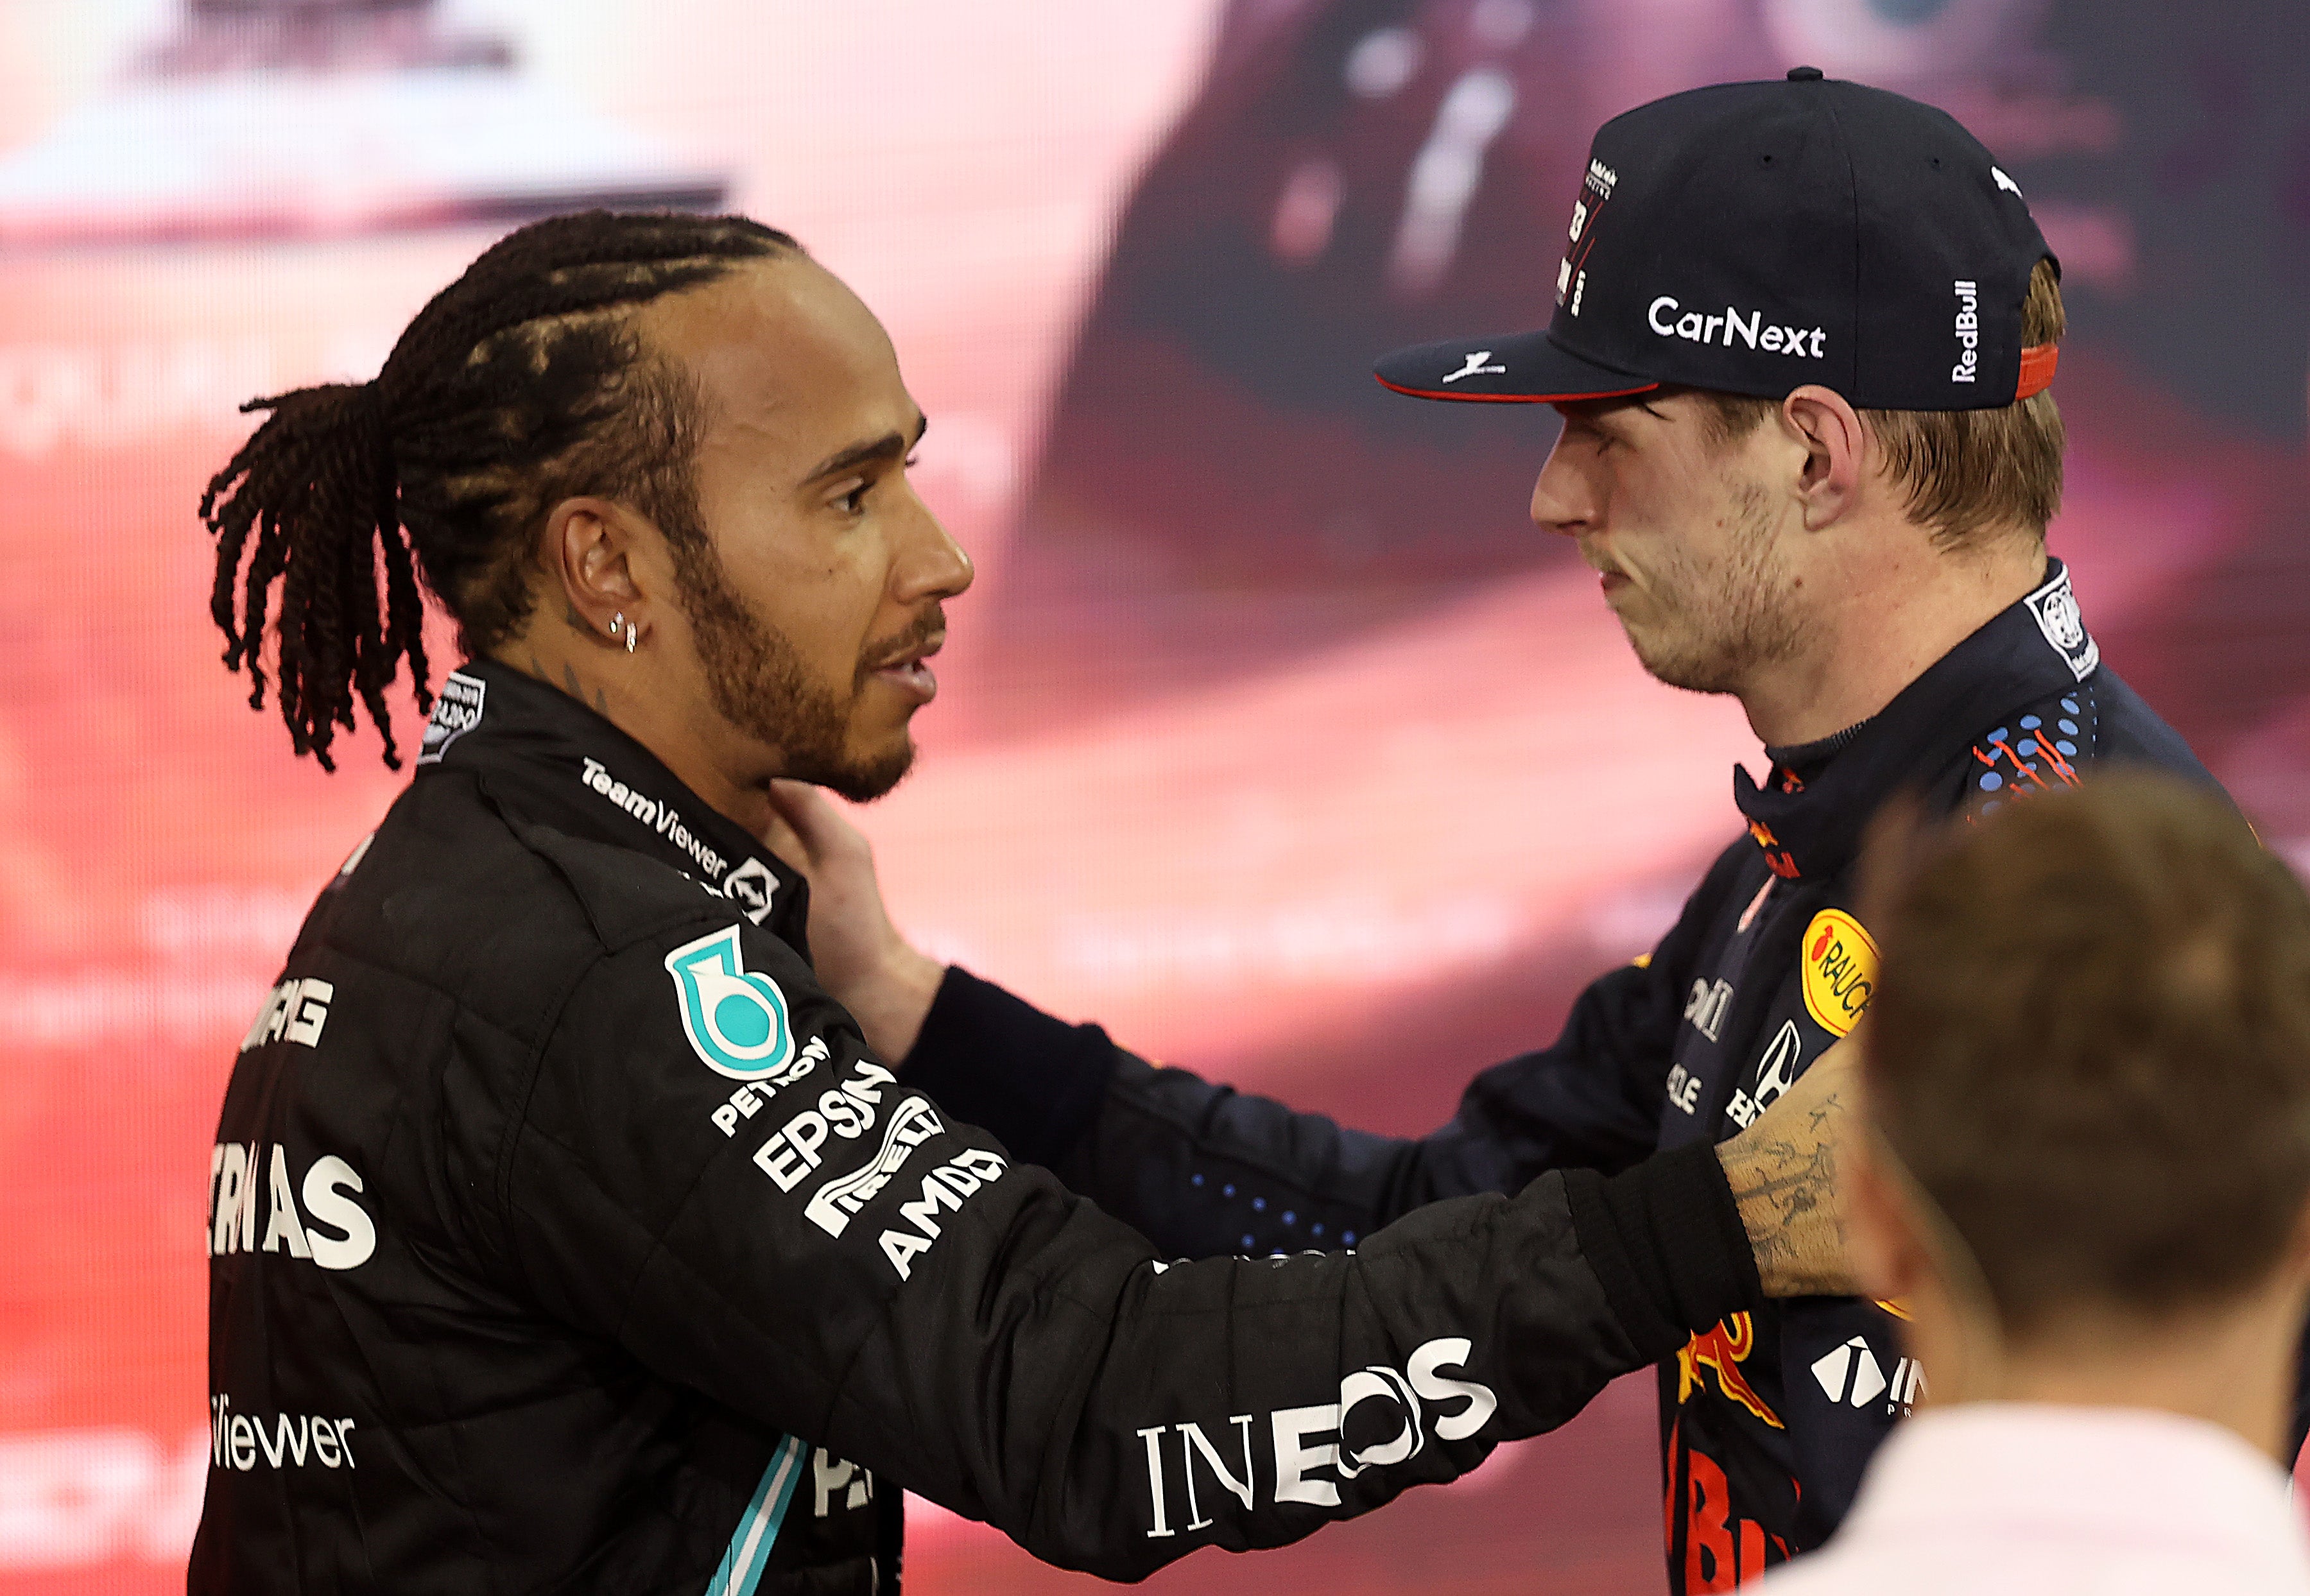 Lewis Hamilton missed out on an eighth title in Abu Dhabi in 2021